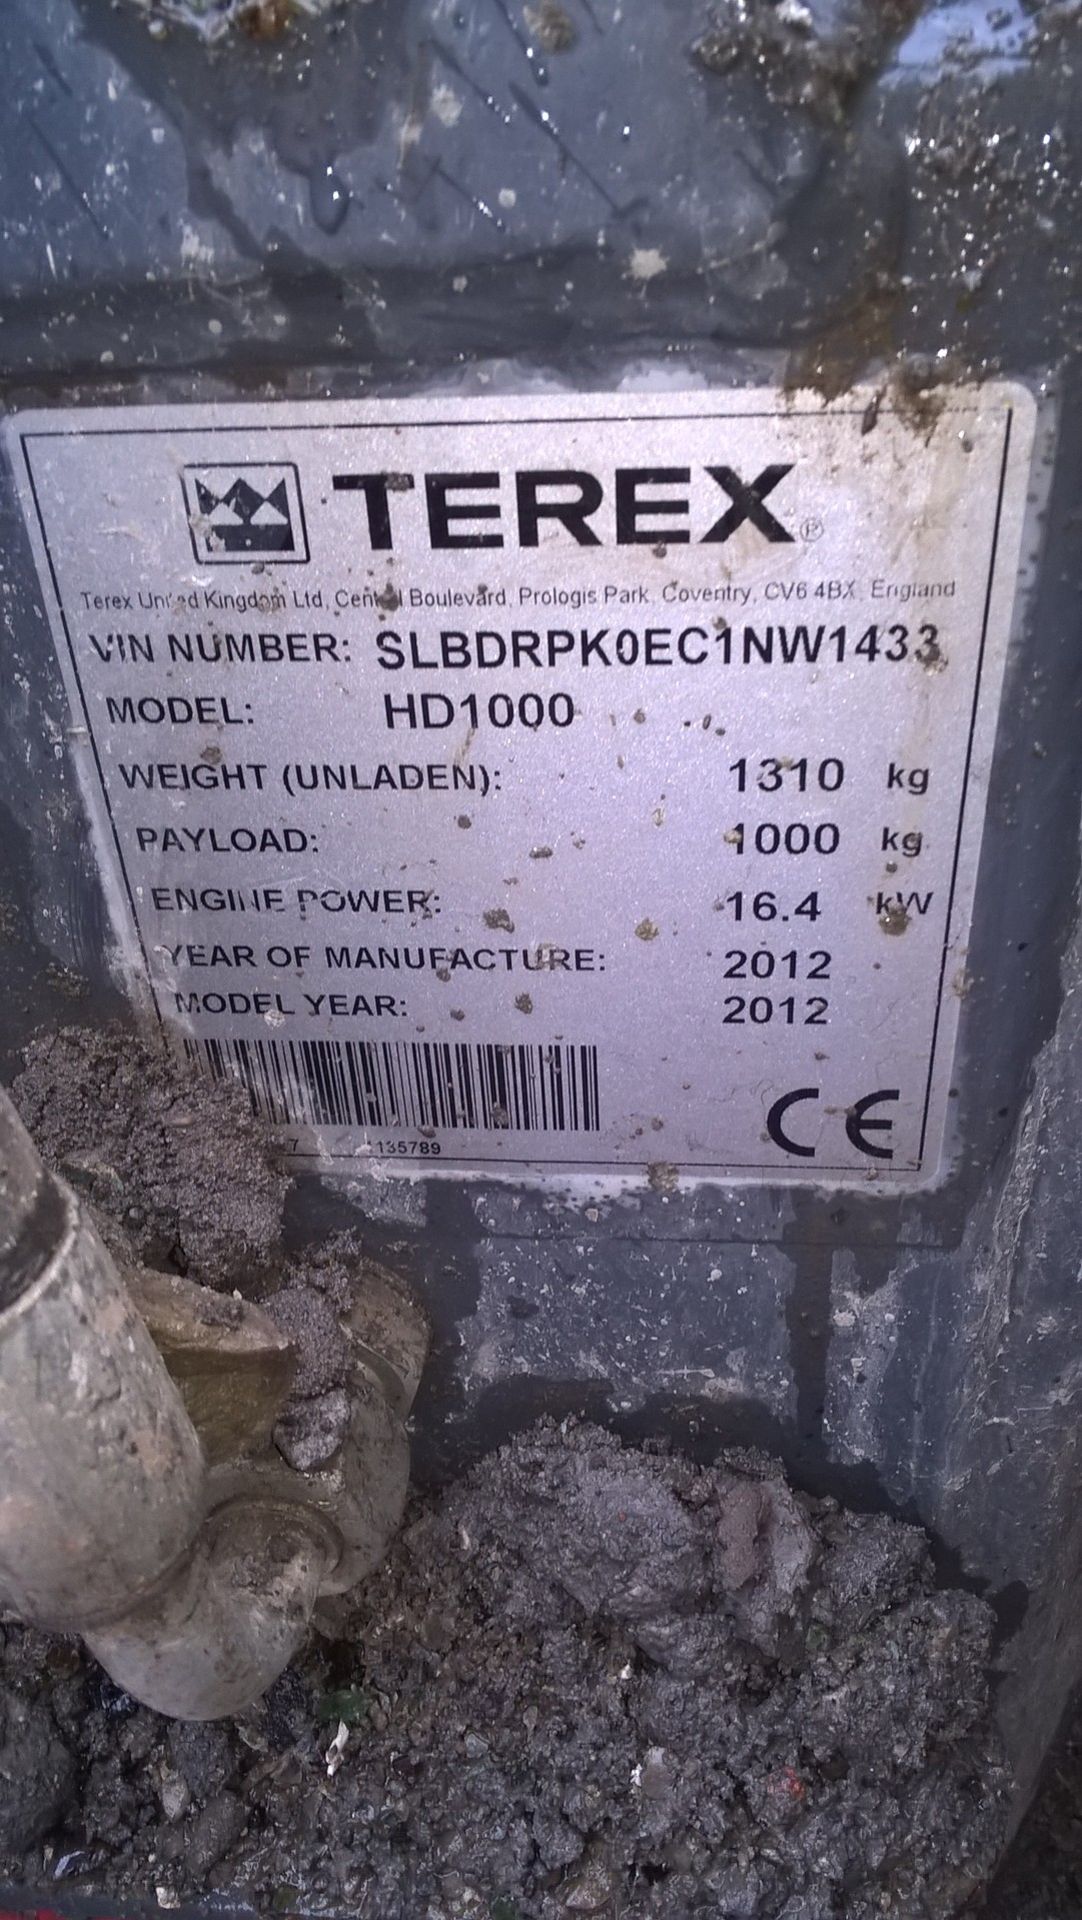 Terex HD1000 HIGH LIFT 4WD MINI DUMPER, VIN SLBDRPK0EC1NW1433, year of manufacture 2012, indicated - Image 5 of 5